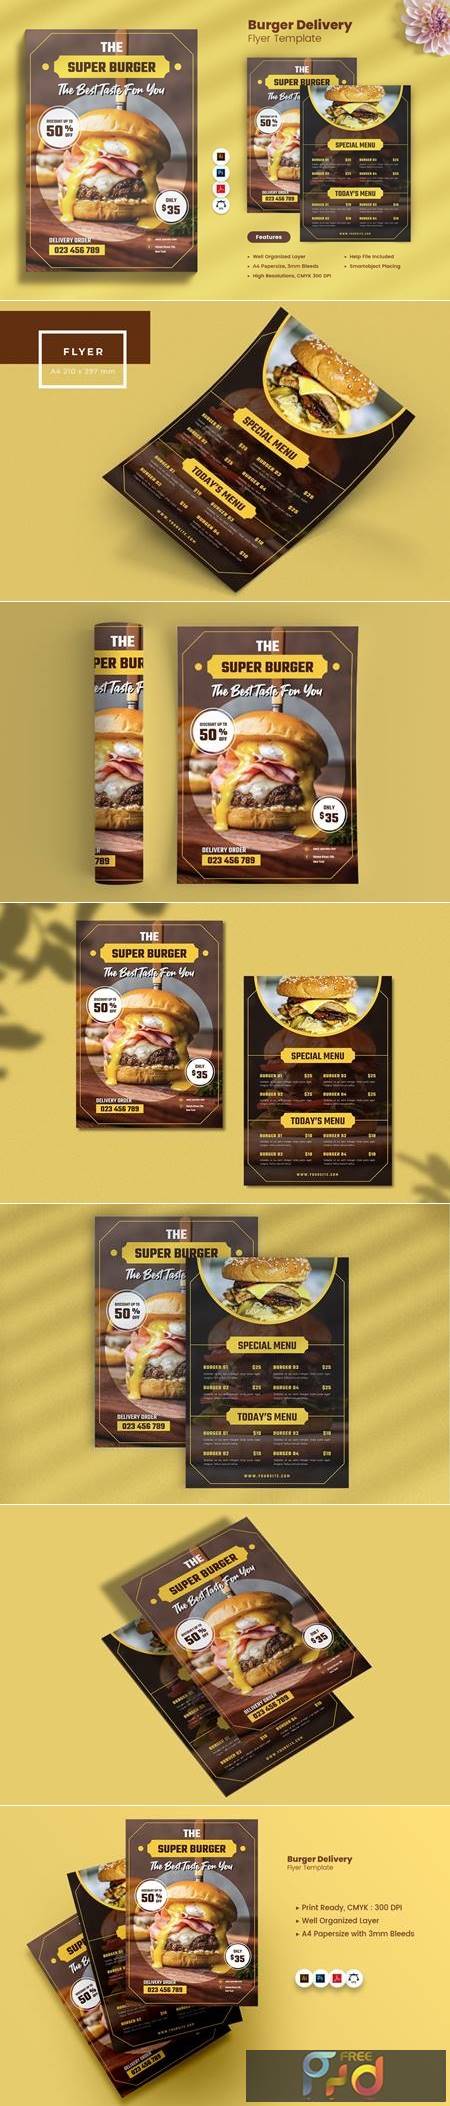 FreePsdVn.com 2103270 TEMPLATE burger delivery flyer nzy25b2